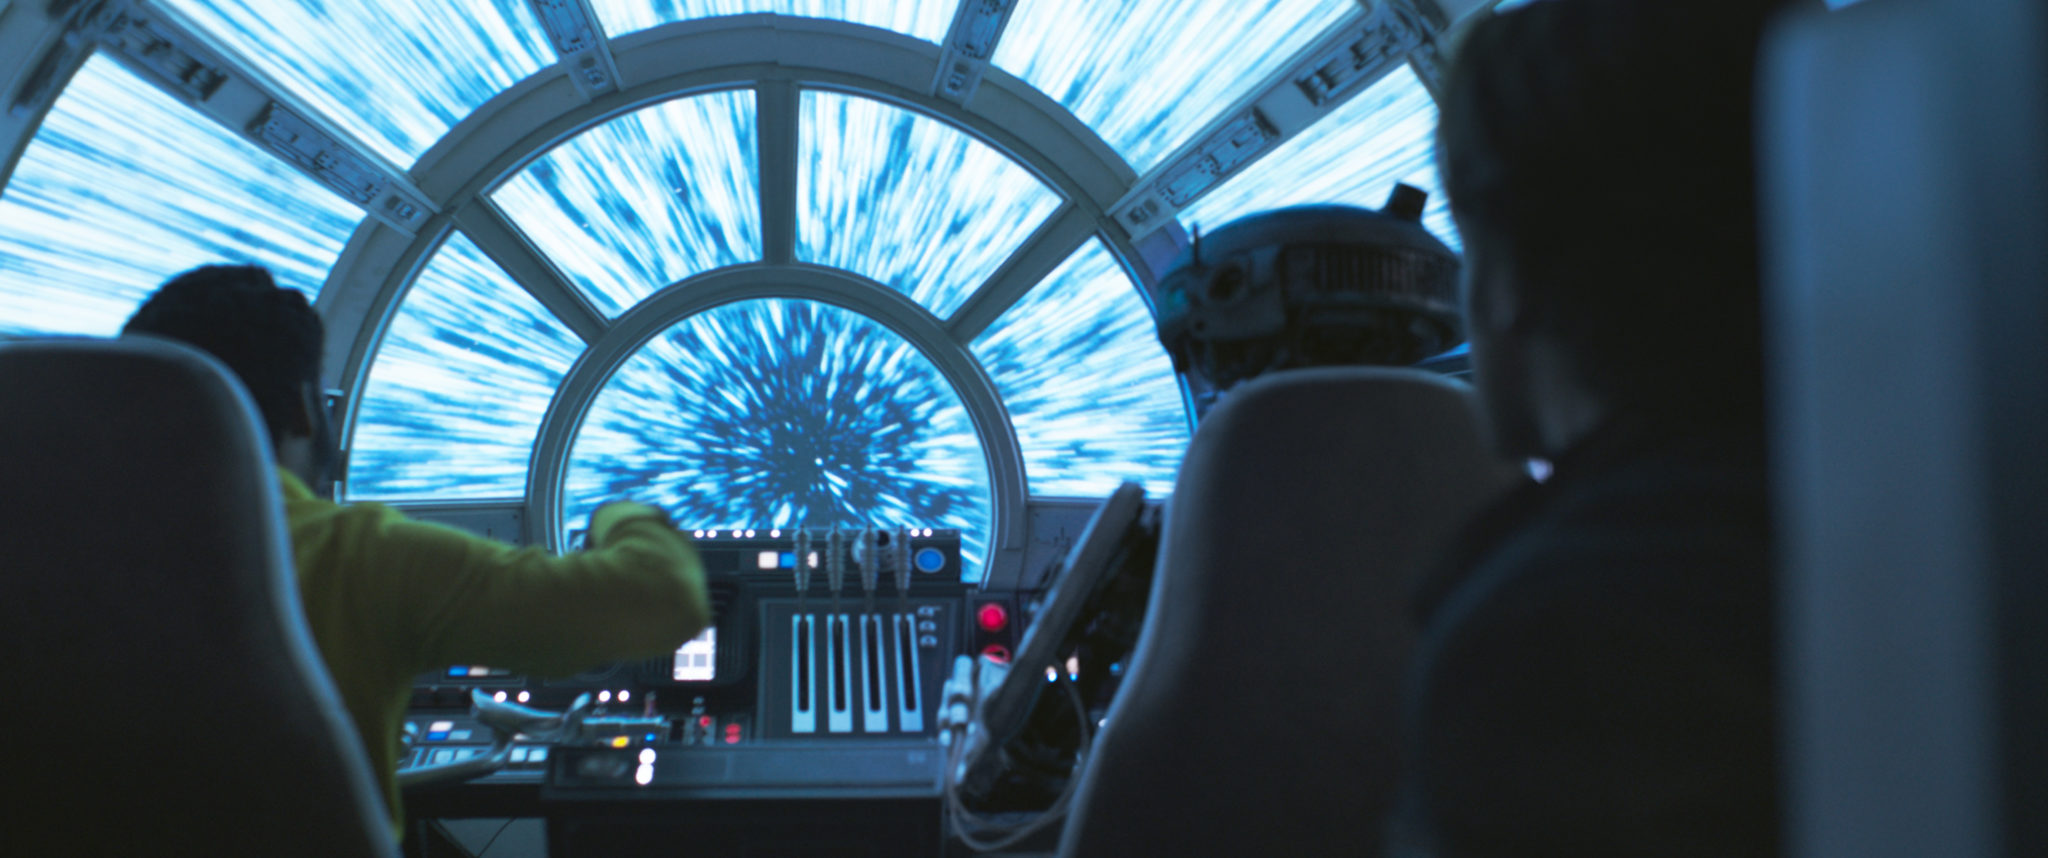 The Millennium Falcon jumps into hyperspace